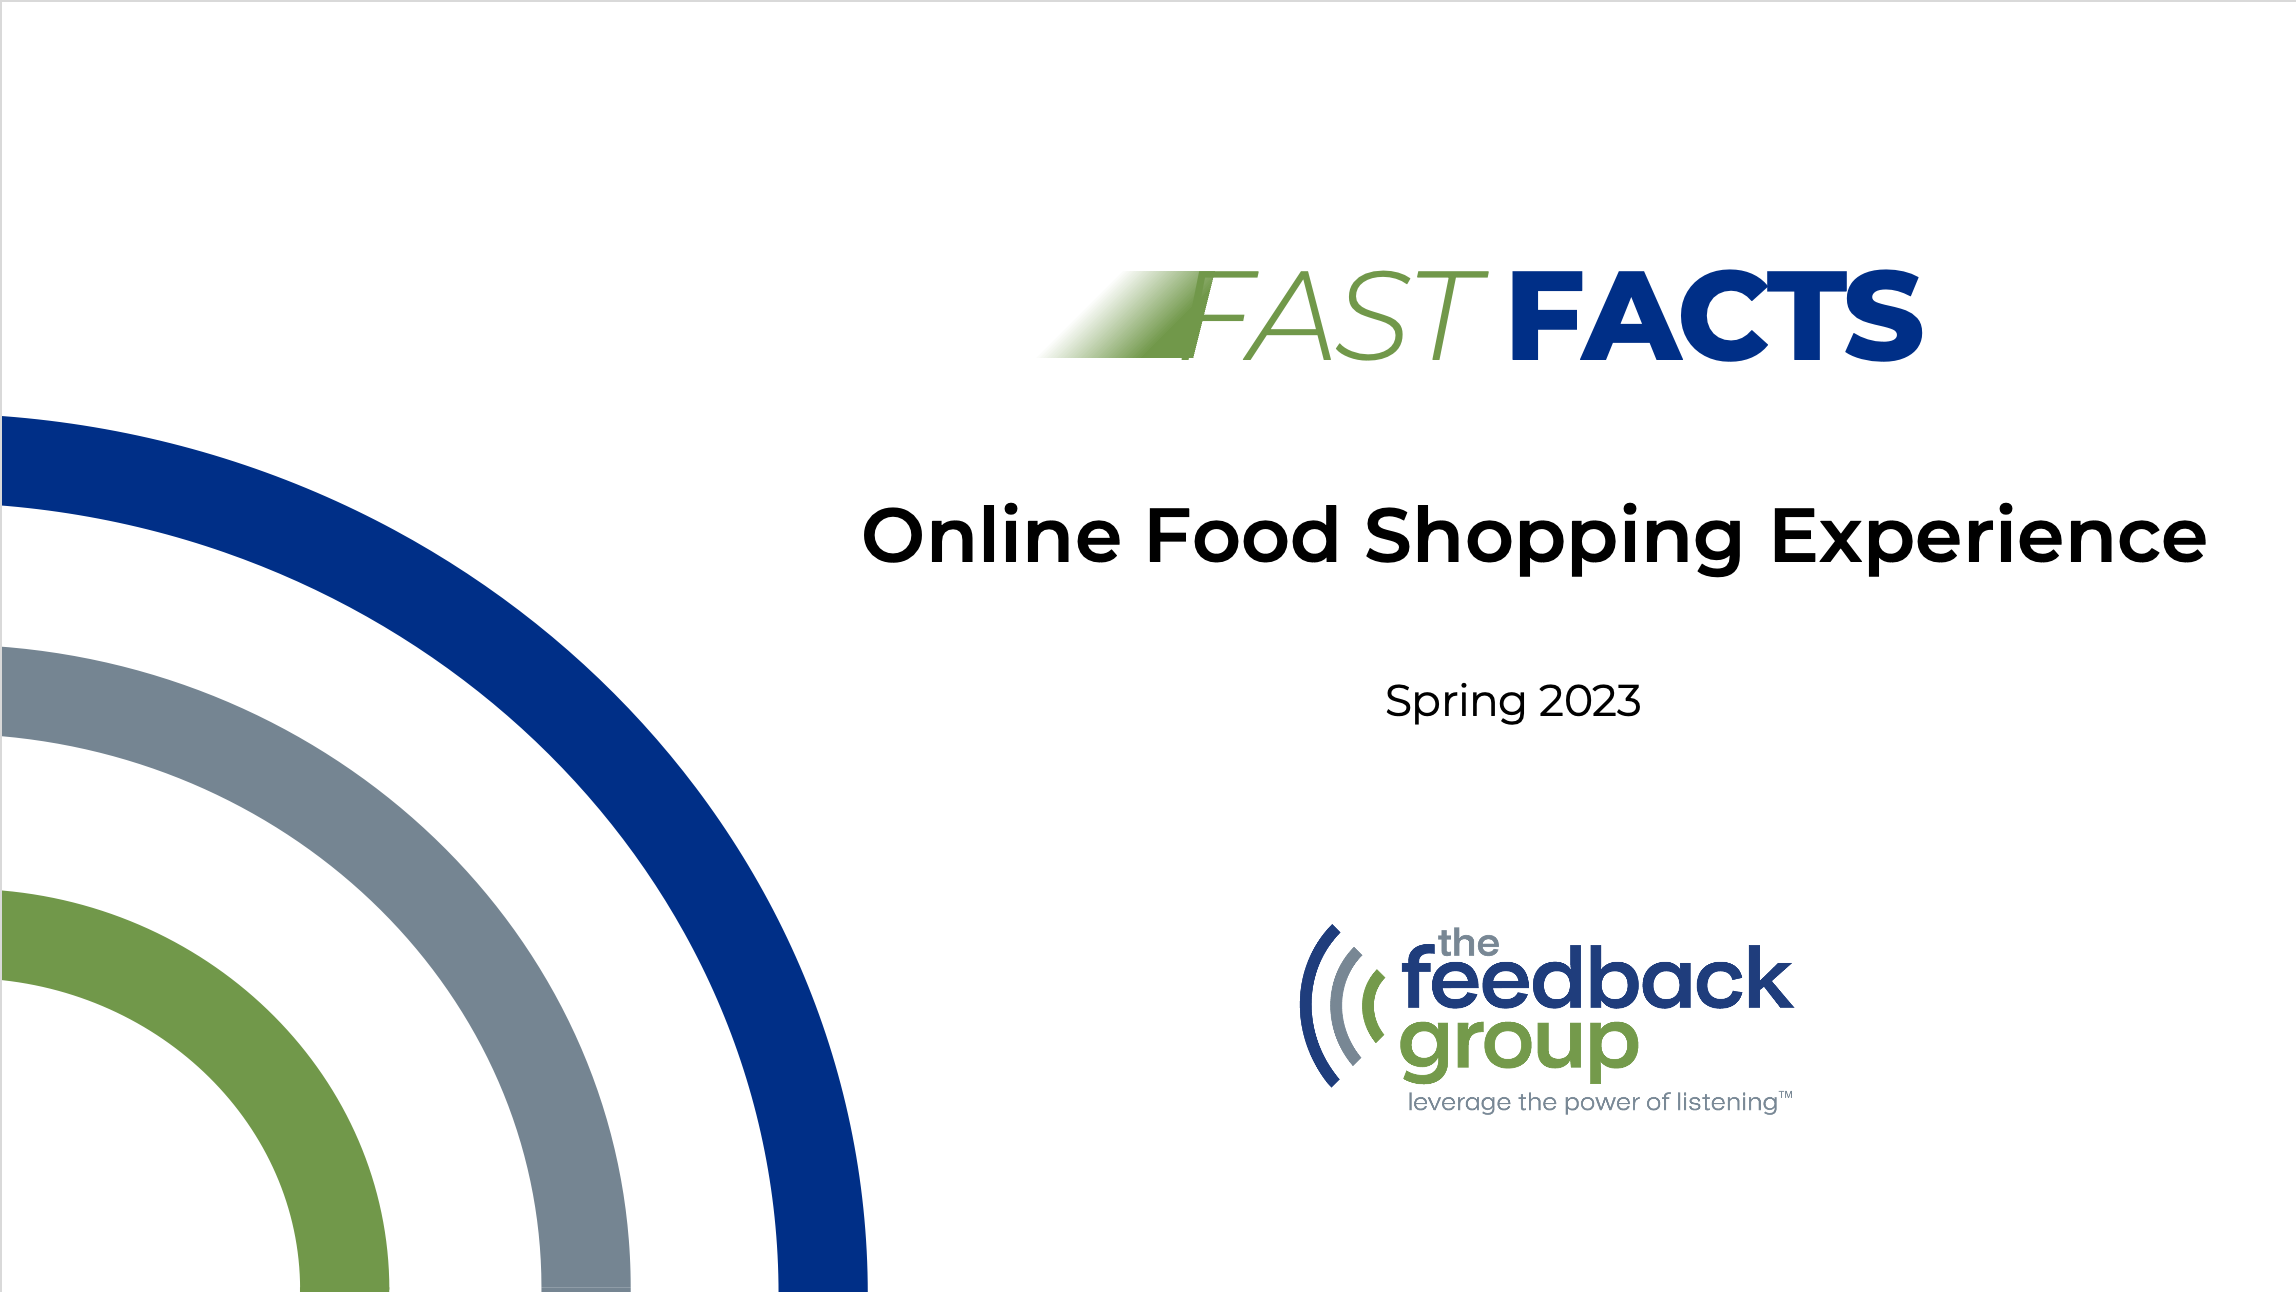 2023 Online Food Shopping Experience